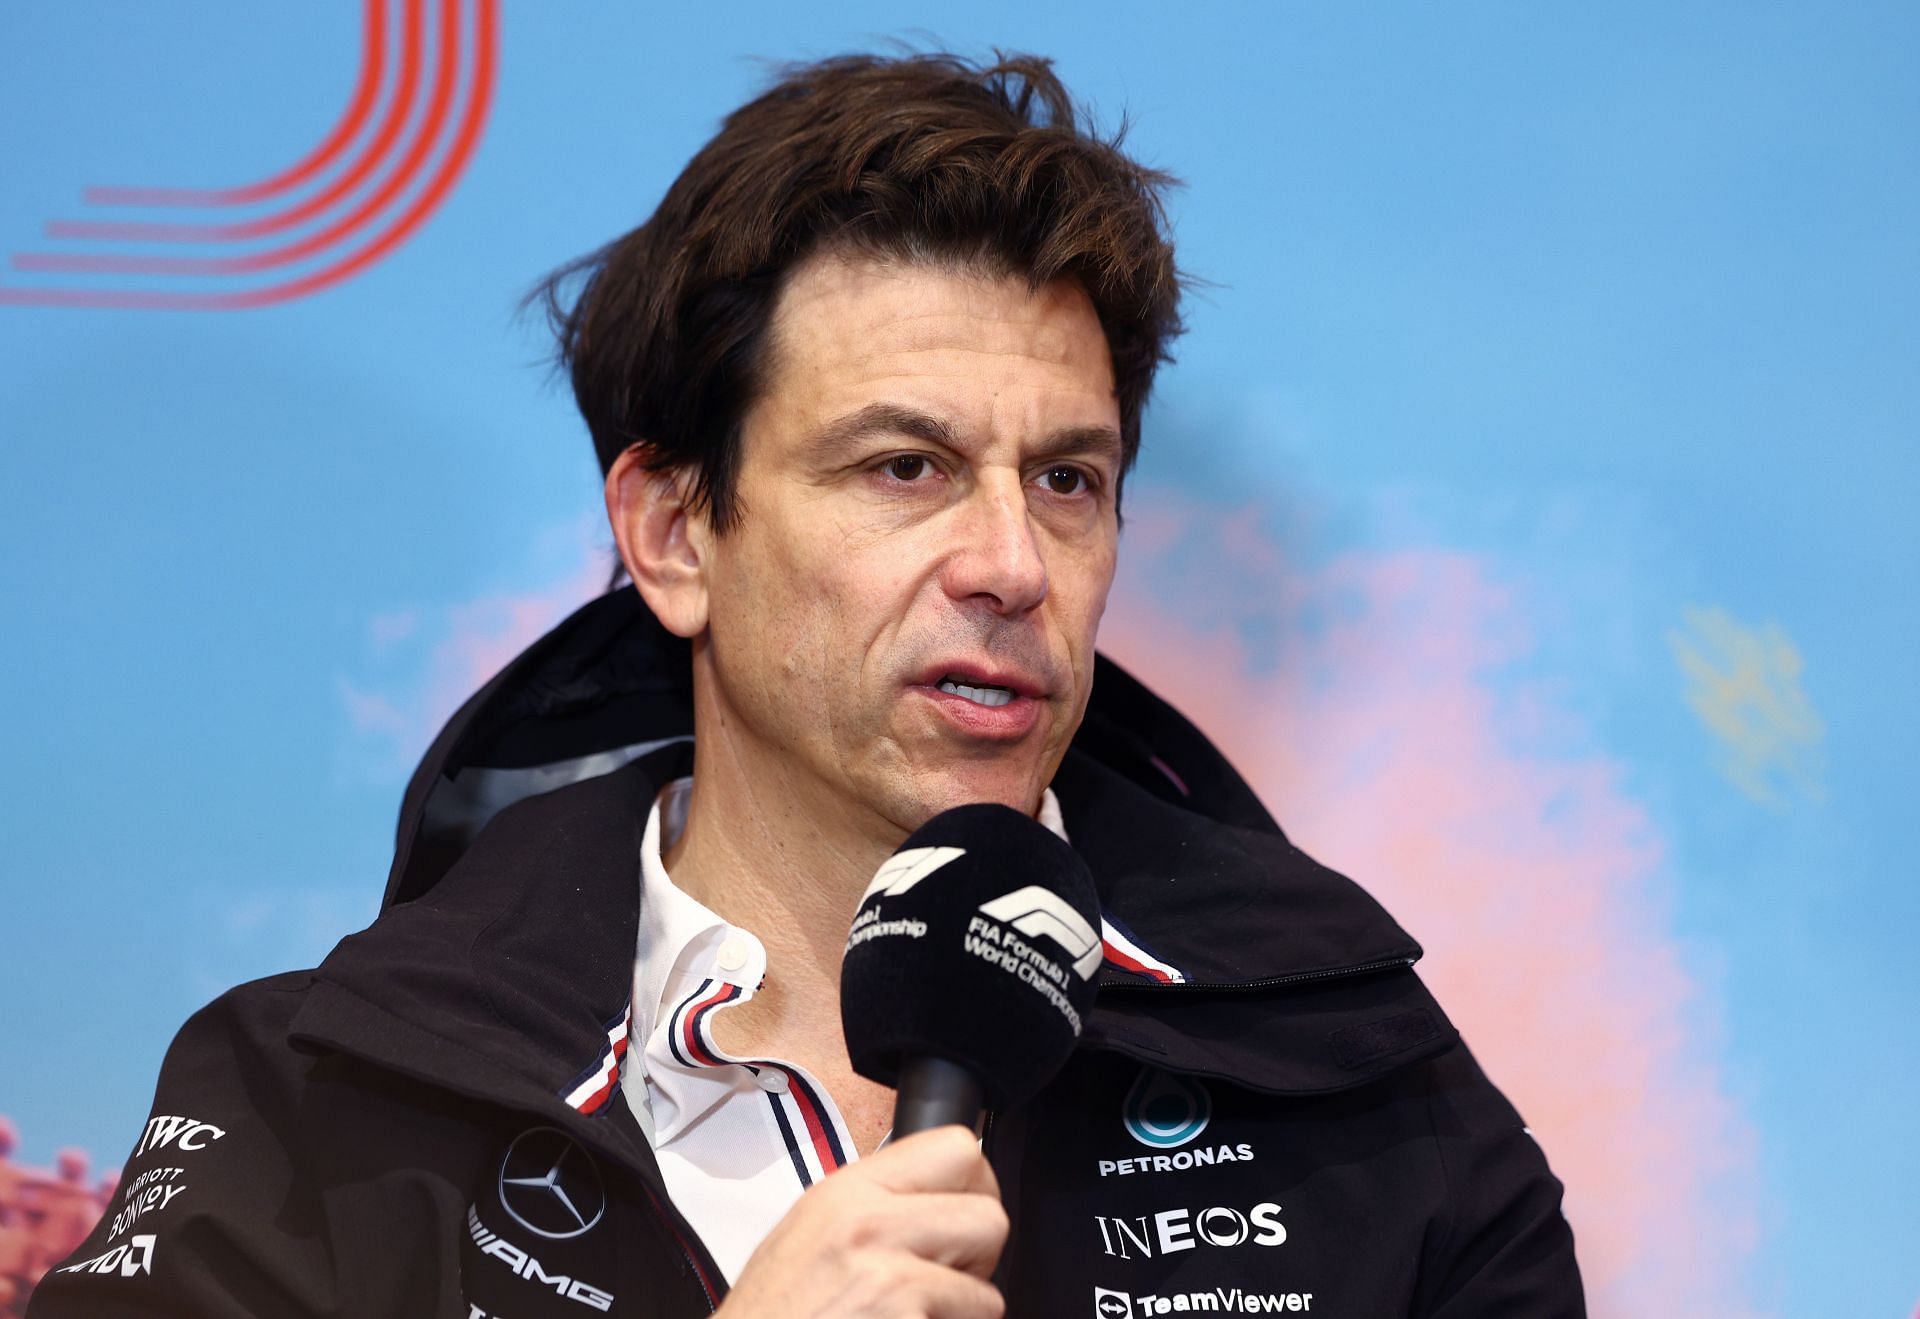 The Mercedes boss feels the performance gaps between teams contribute to the lack of entertainment in the sprint race